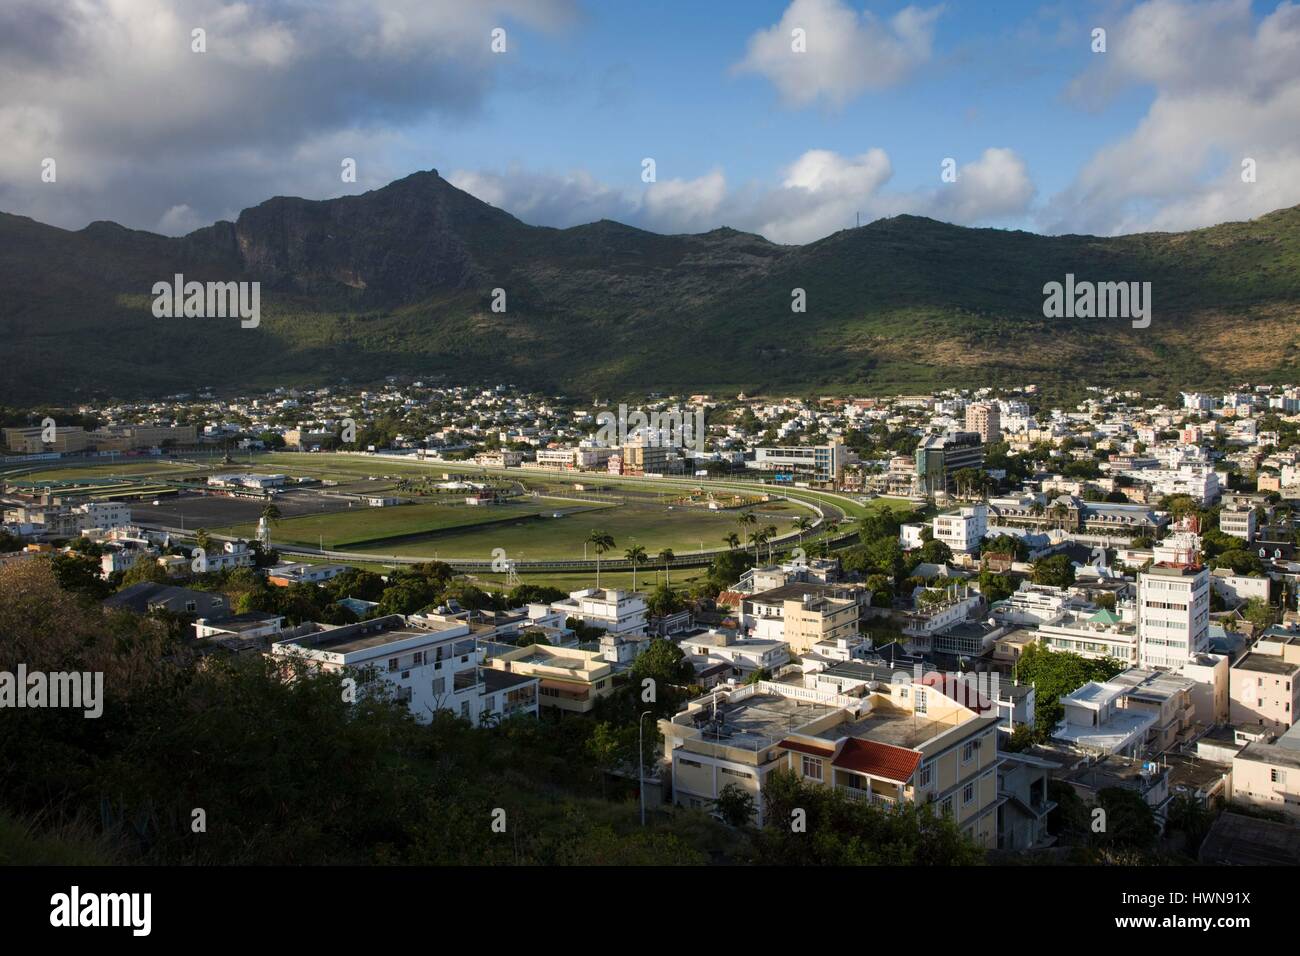 Mauritius, Port Louis, Champ de Mars Racecourse from Fort Adelaide, morning Stock Photo